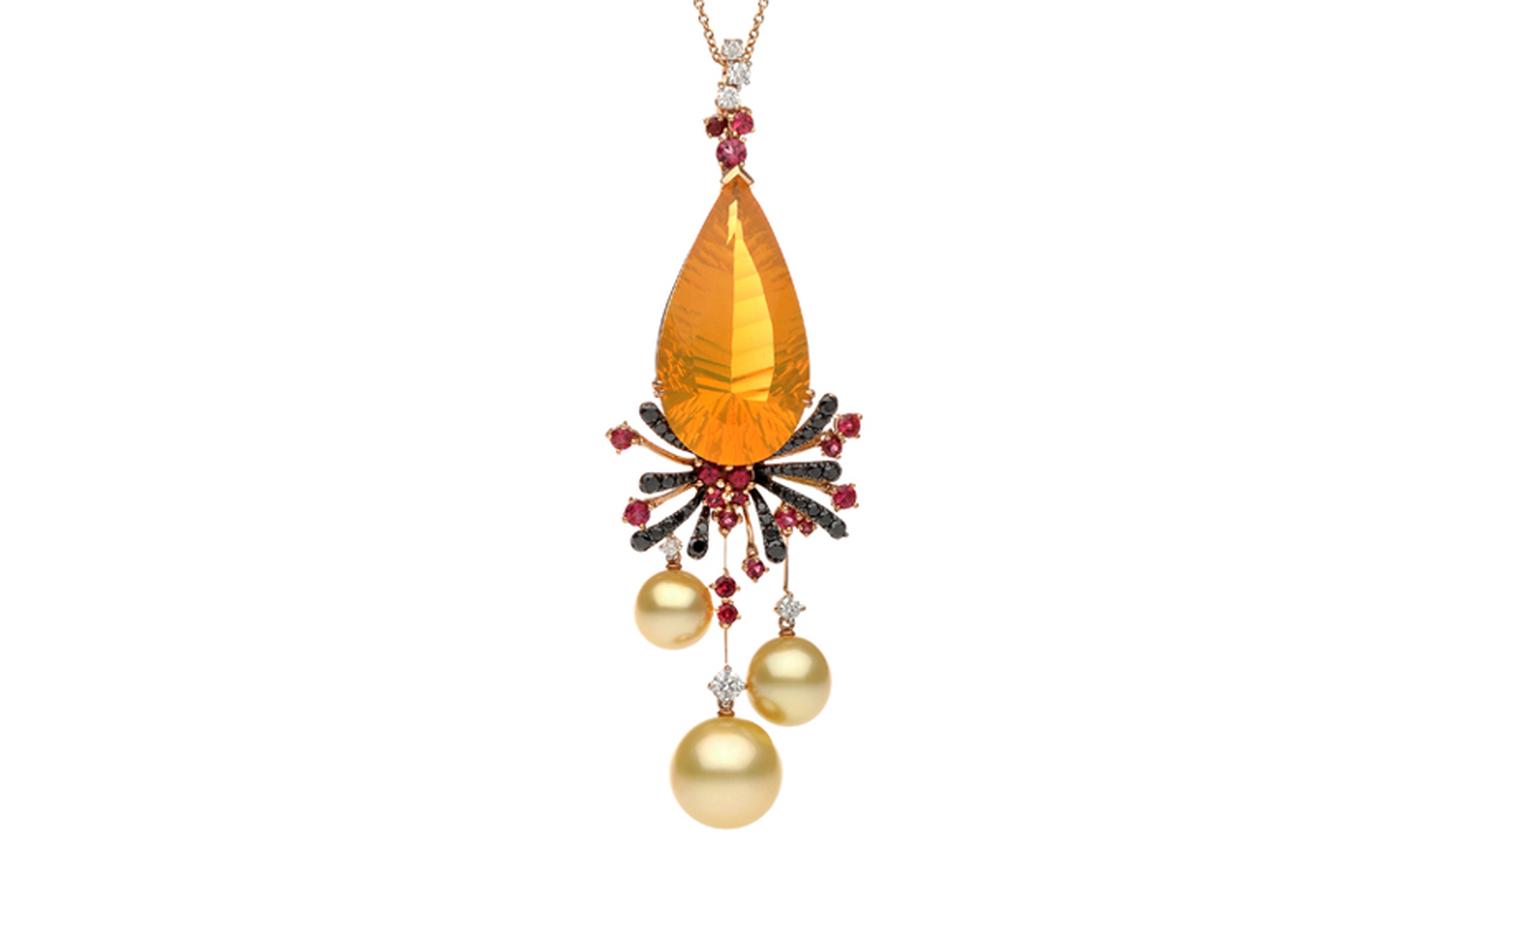 Autore, Fire & Ice Fiery Lava rose gold, South Sea pearl, red spinel, fire opal, and black and white diamond necklace. $65,000 AUD.